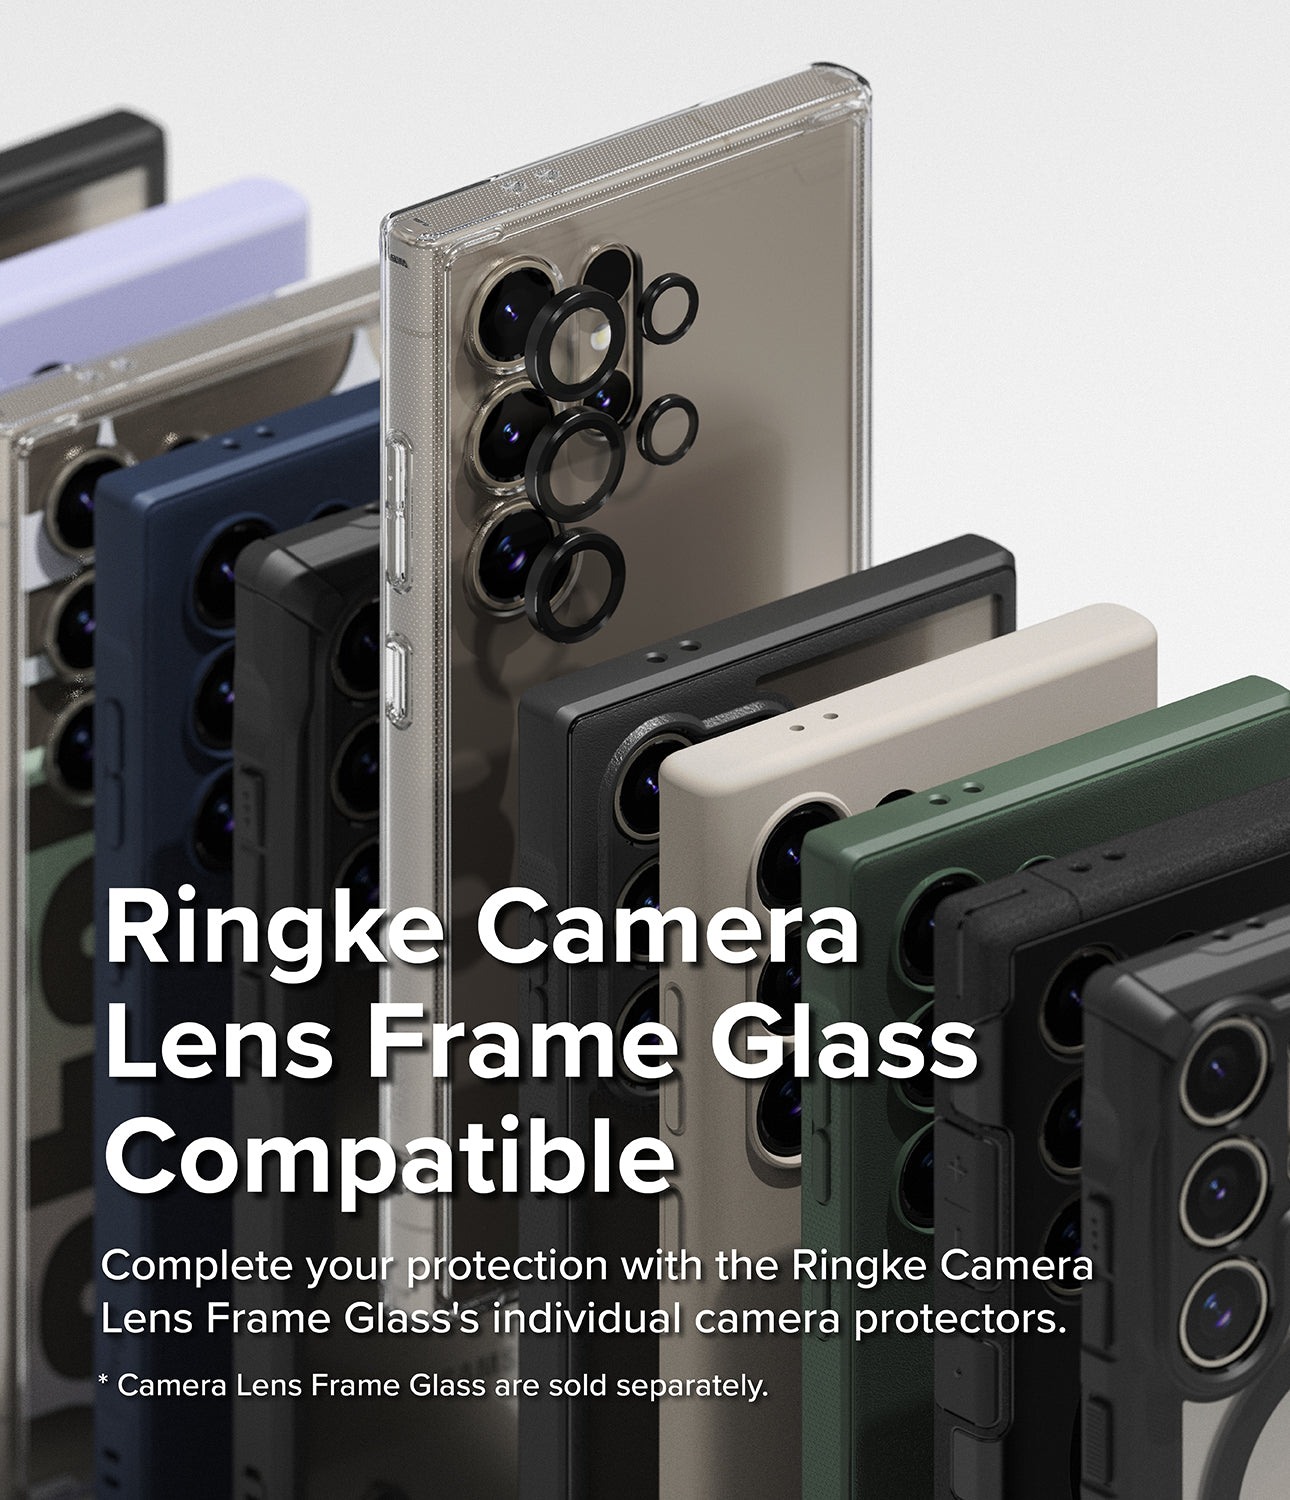 Galaxy S24 Ultra Case | Onyx - Gray - Ringke Camera Lens Frame Glass Compatible. Complete your protection with the Ringke Camera Lens Frame Glass' individual camera protectors.